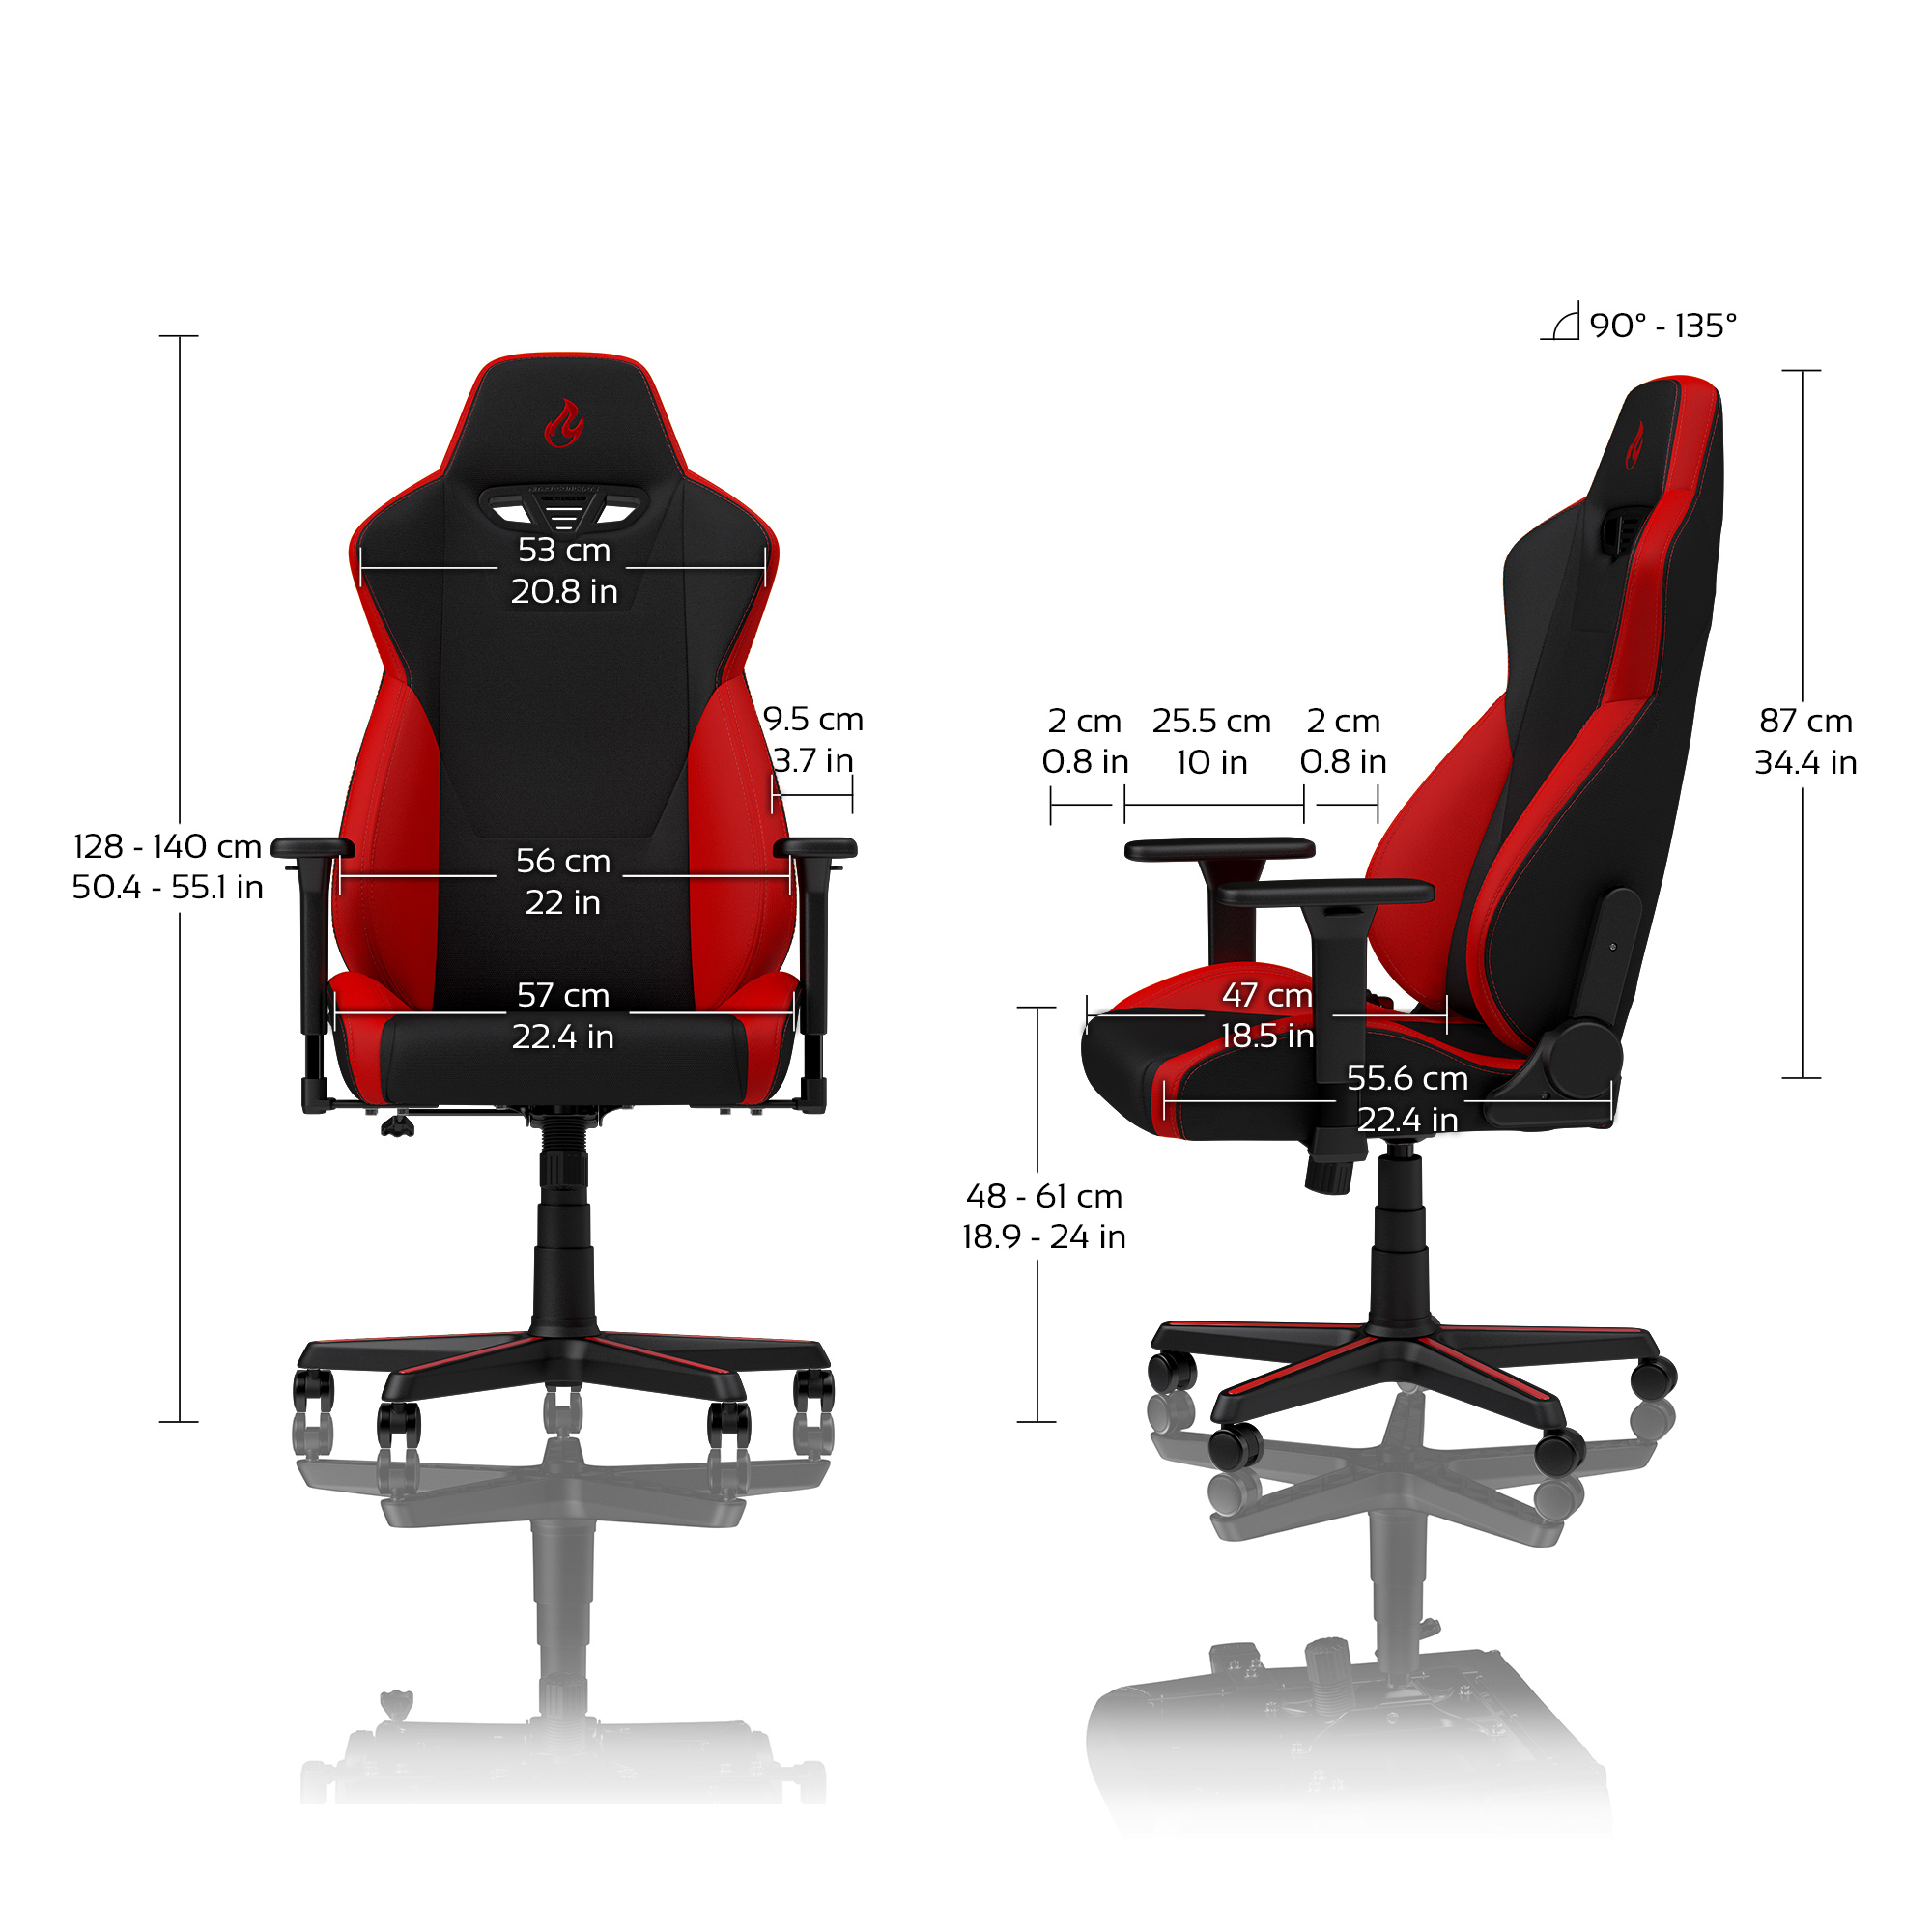 Nitro Concepts - Nitro Concepts S300 Fabric Gaming Chair - Inferno Red